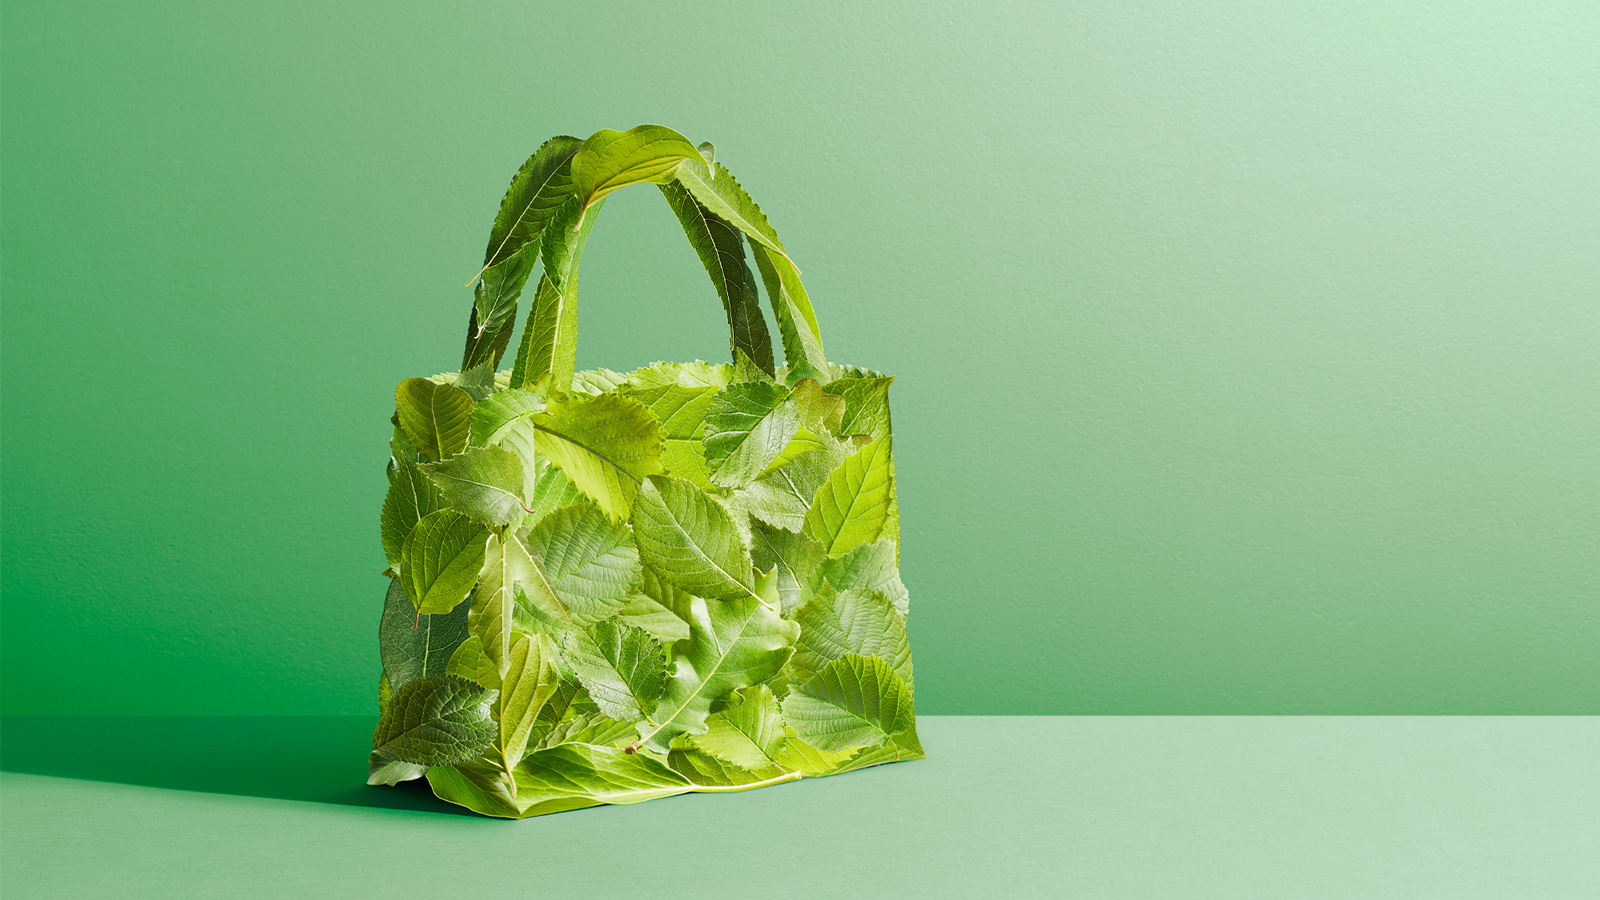 Green shopping bag made of leaves